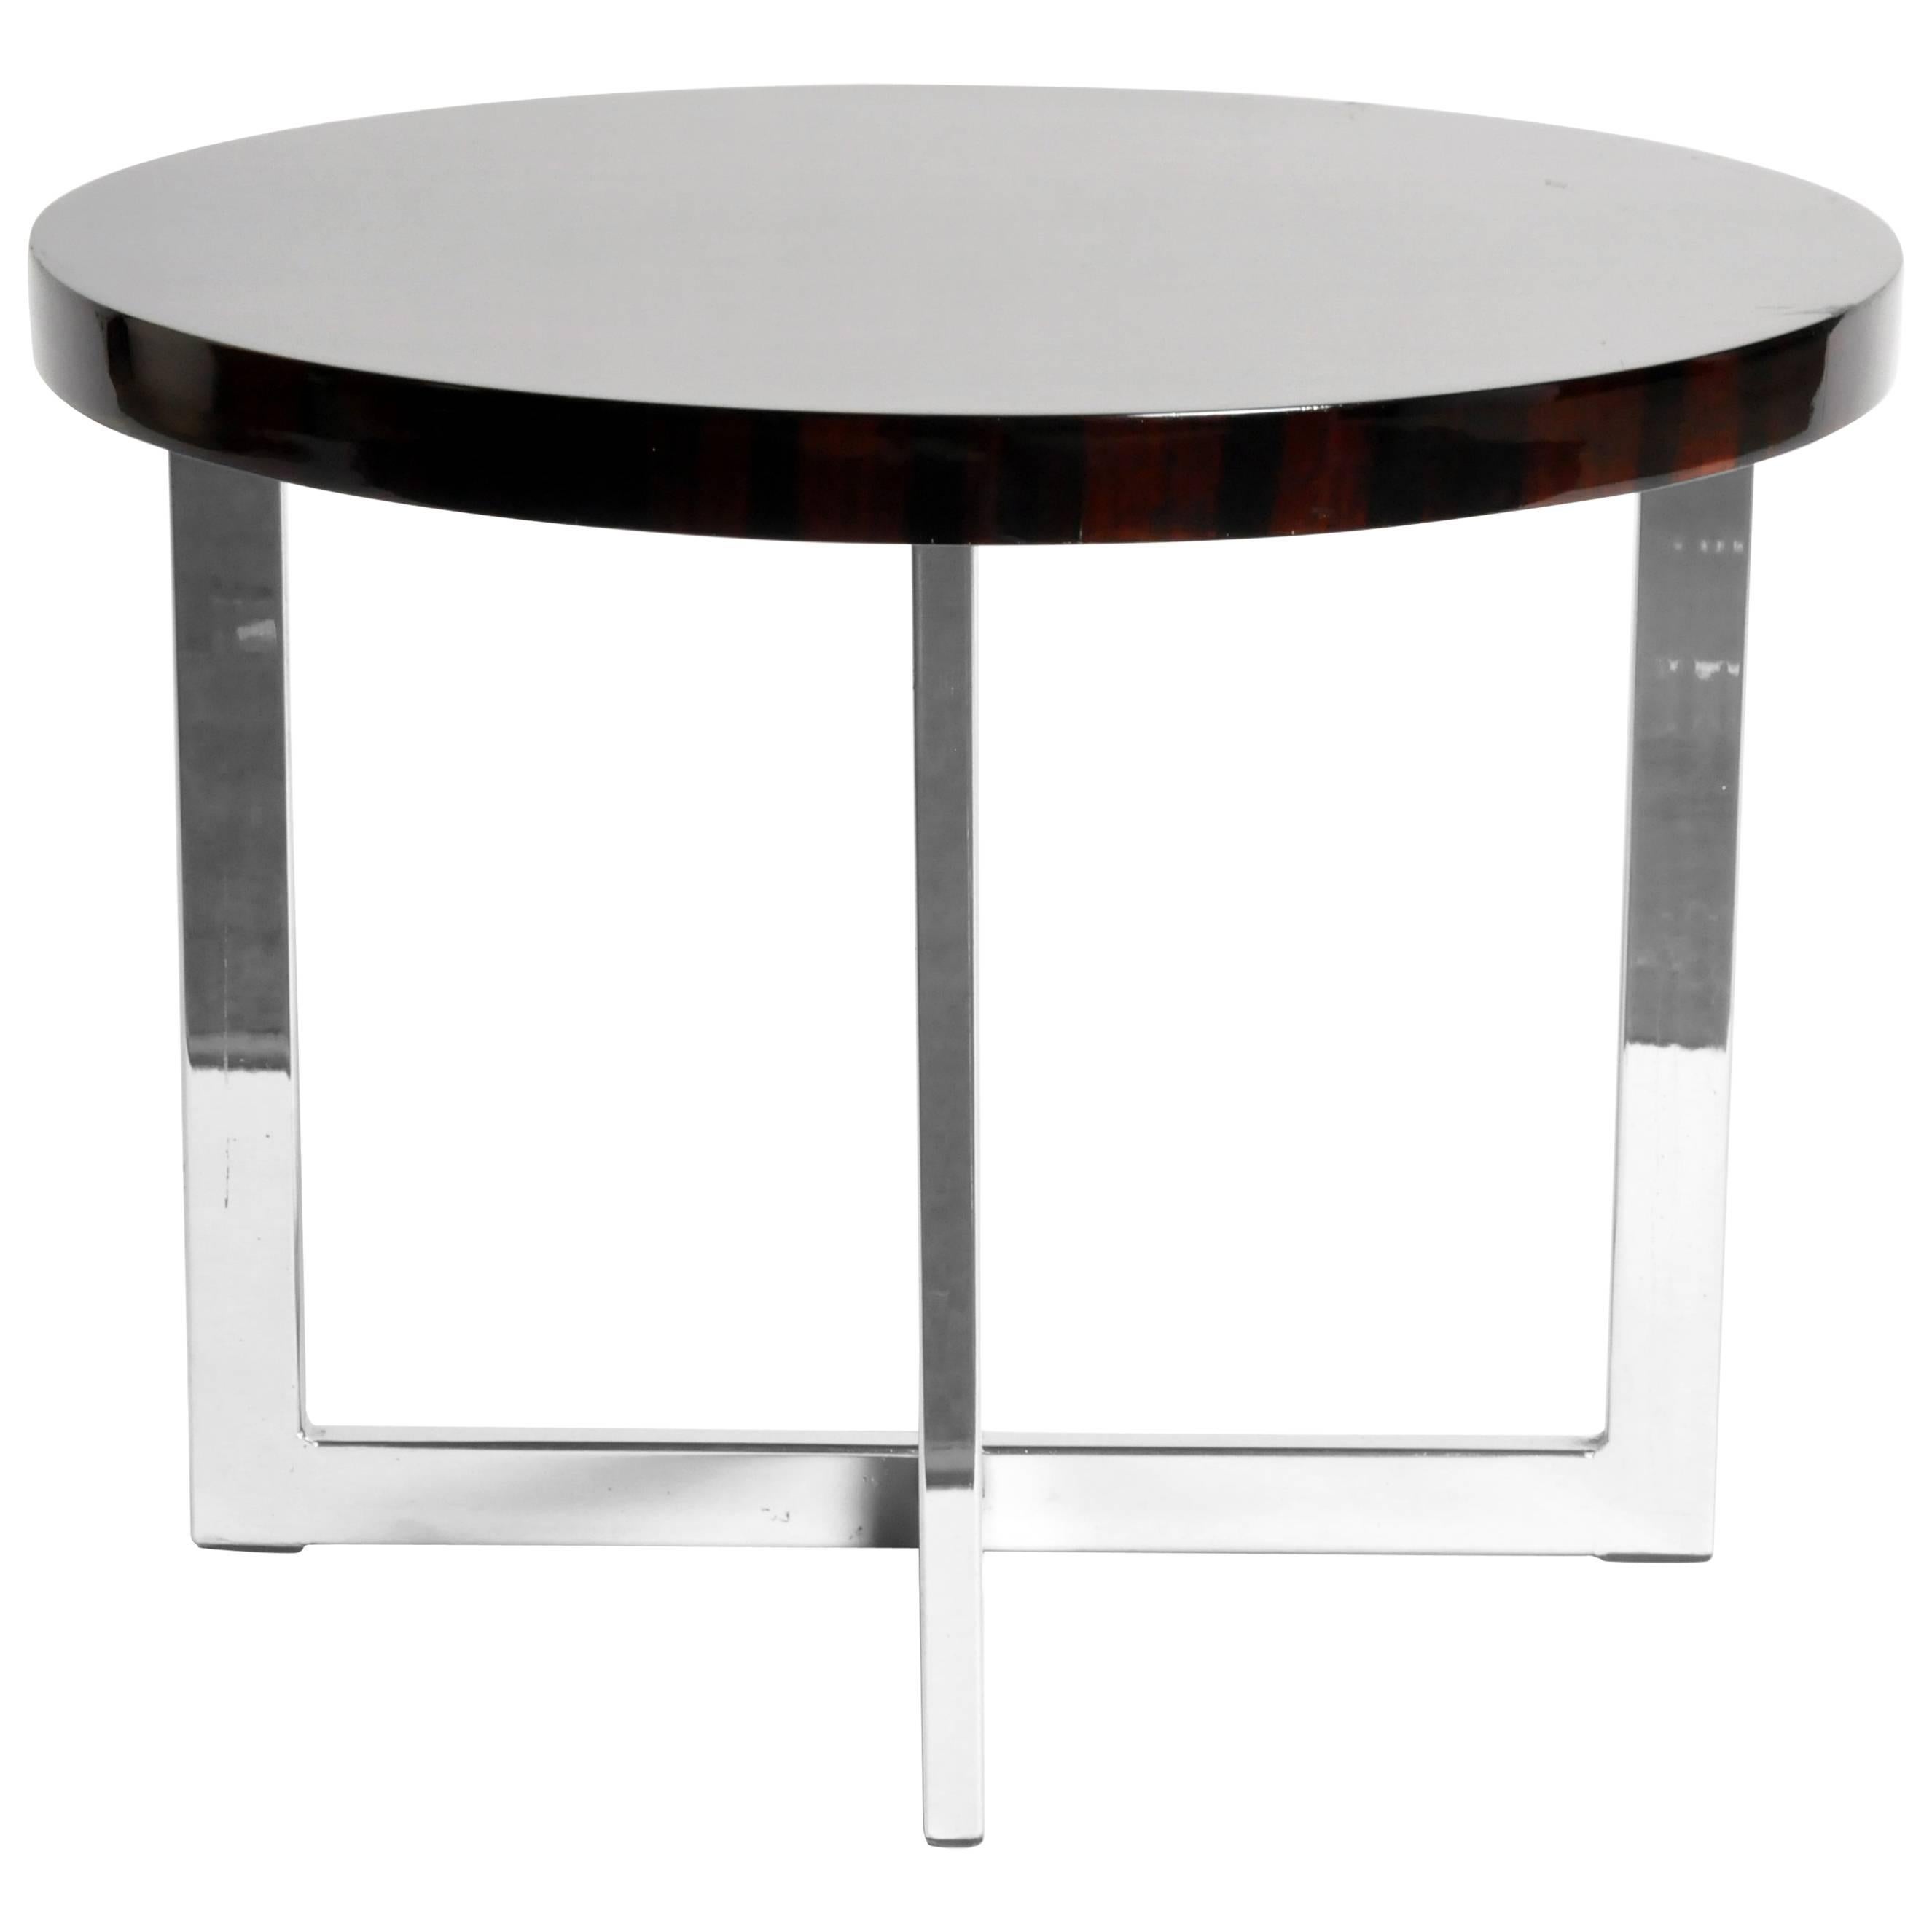 French Round Low Table with Metal Legs